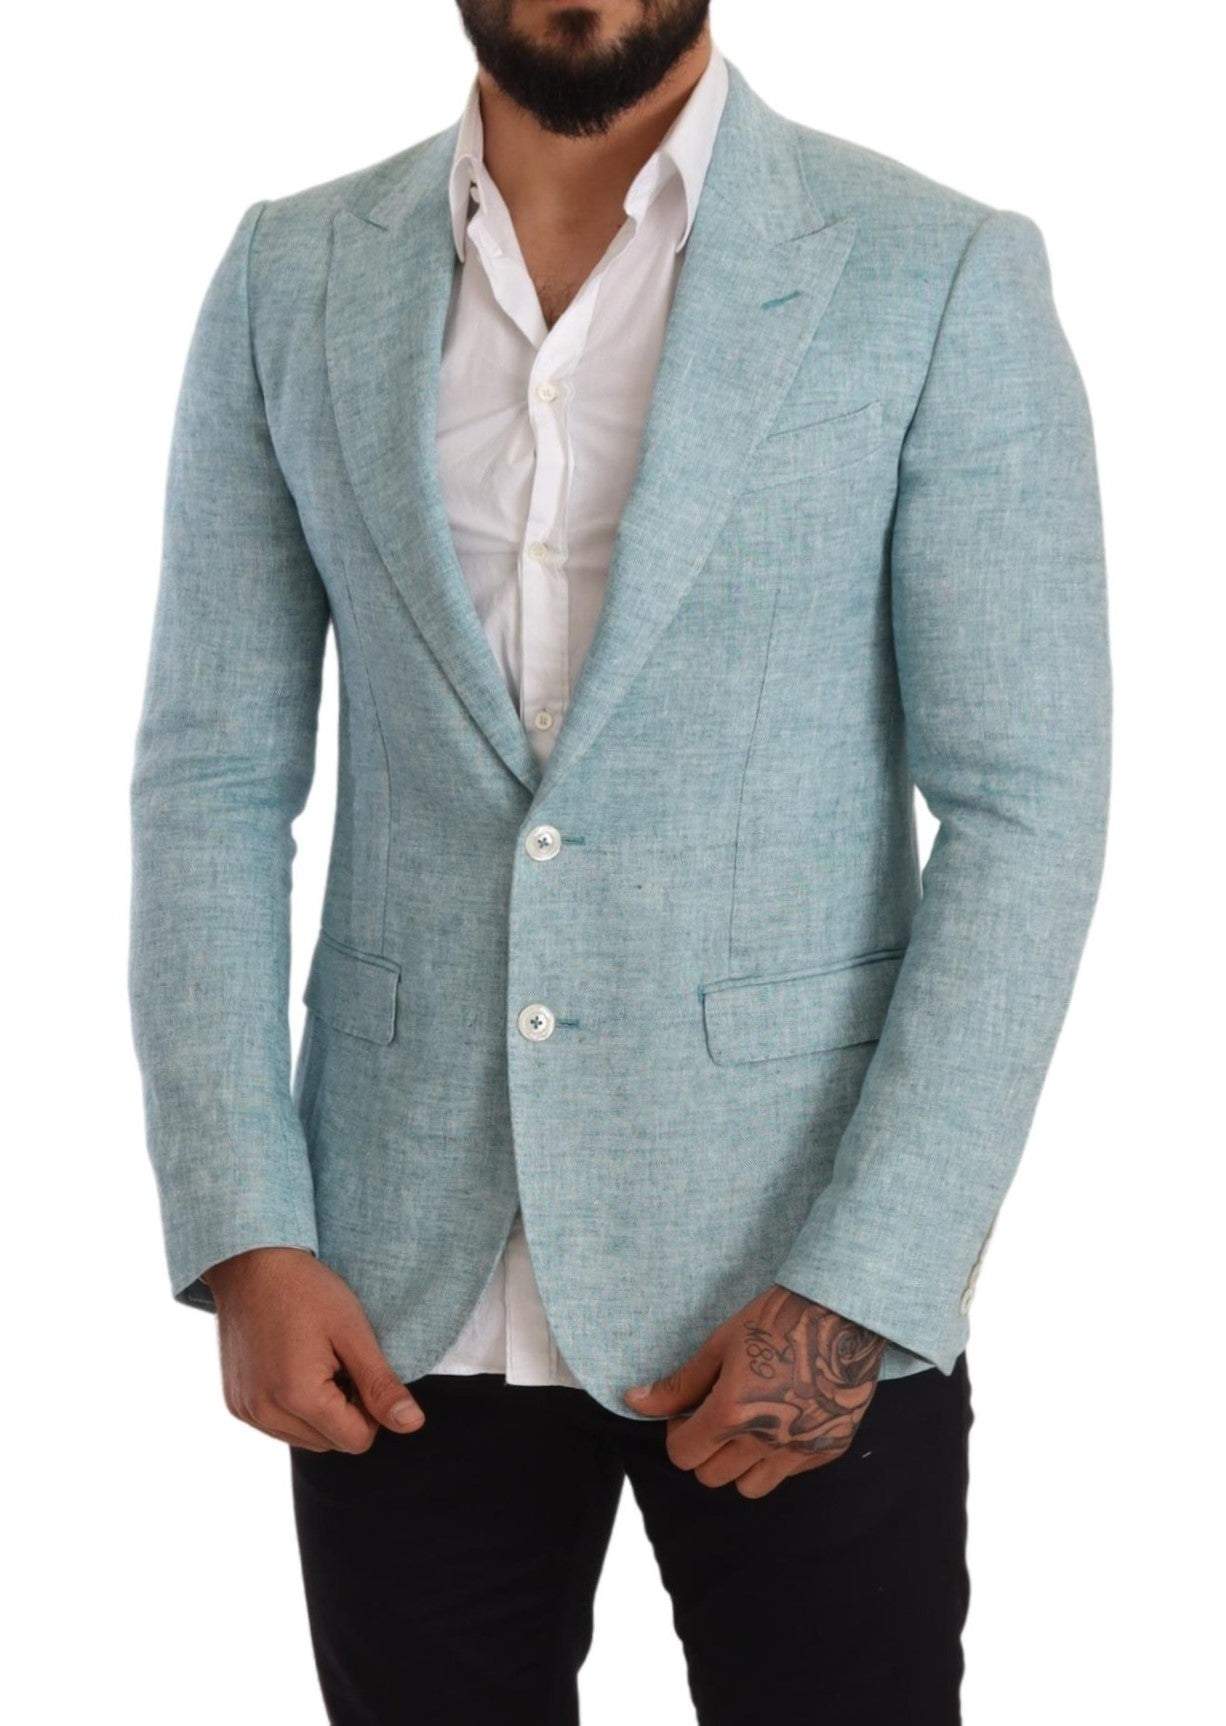 Dolce & Gabbana Blue Slim Fit Linen Coat TAORMINA Blazer #men, Blazers - Men - Clothing, Dolce & Gabbana, feed-agegroup-adult, feed-color-Blue, feed-gender-male, IT46 | S, Light Blue at SEYMAYKA